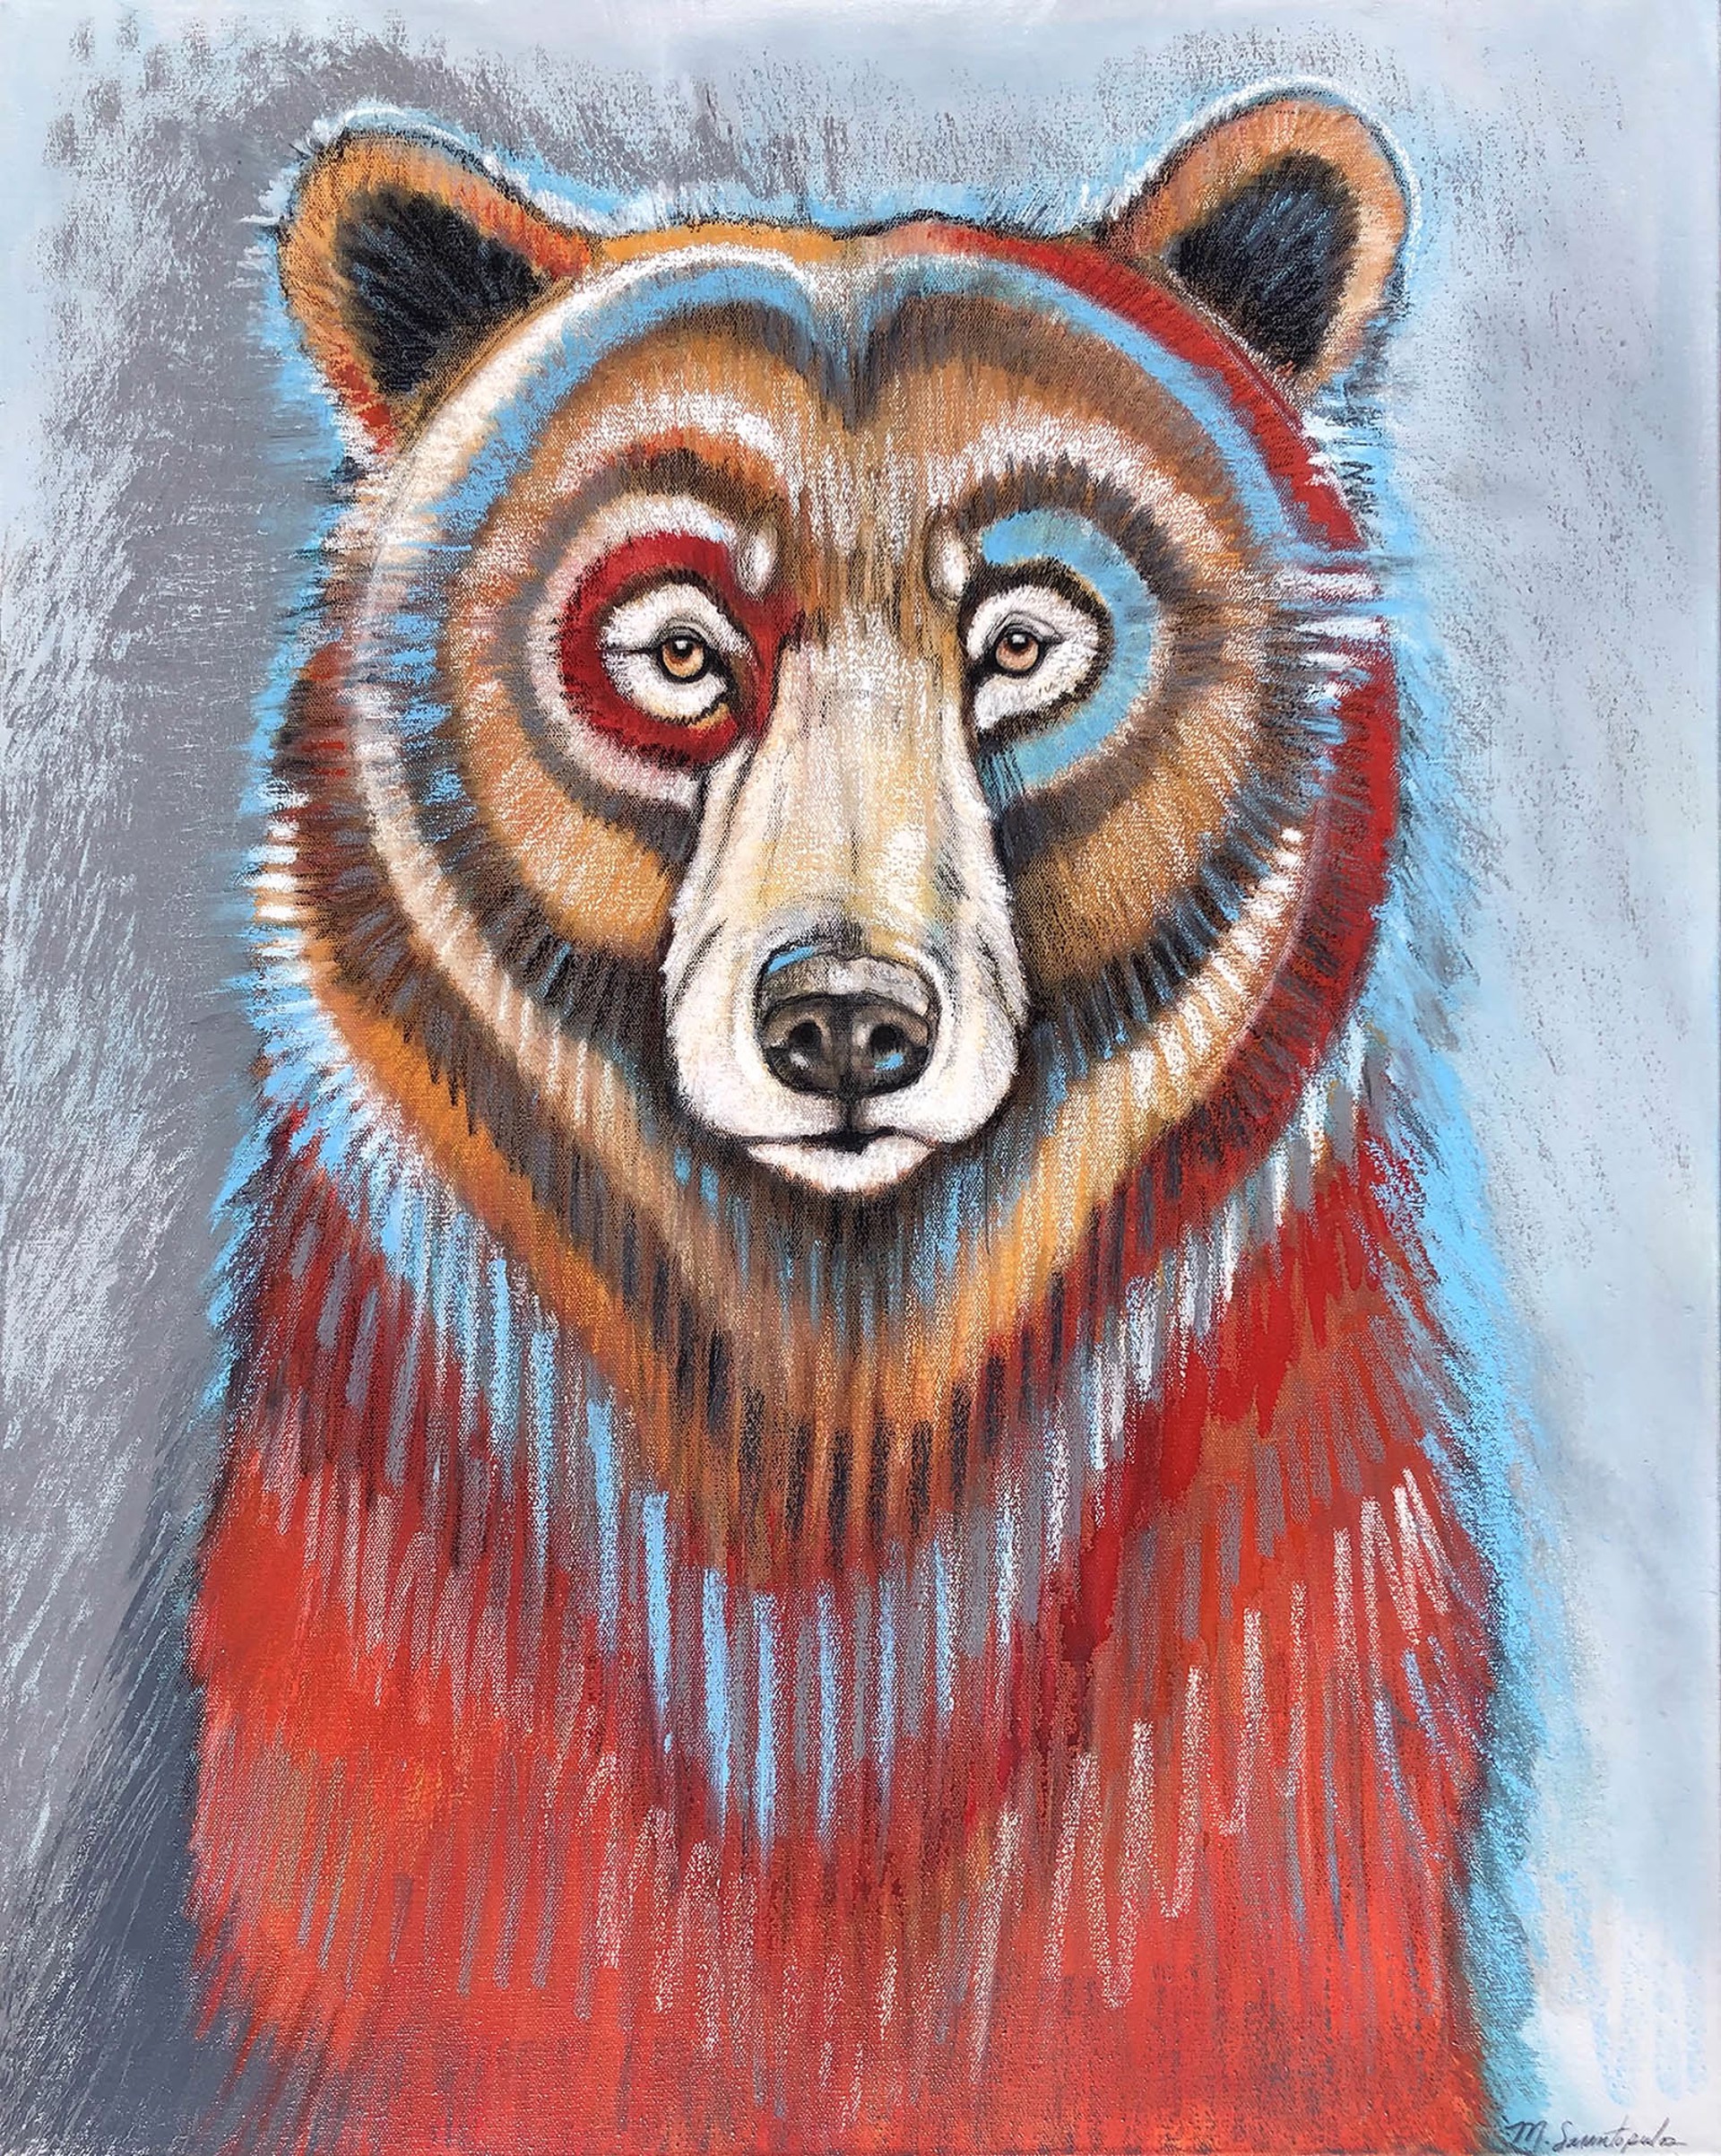 Original Mixed Media Painting Featuring A Grizzly Bear Facing Forward In Red And Blue Over Gray Background